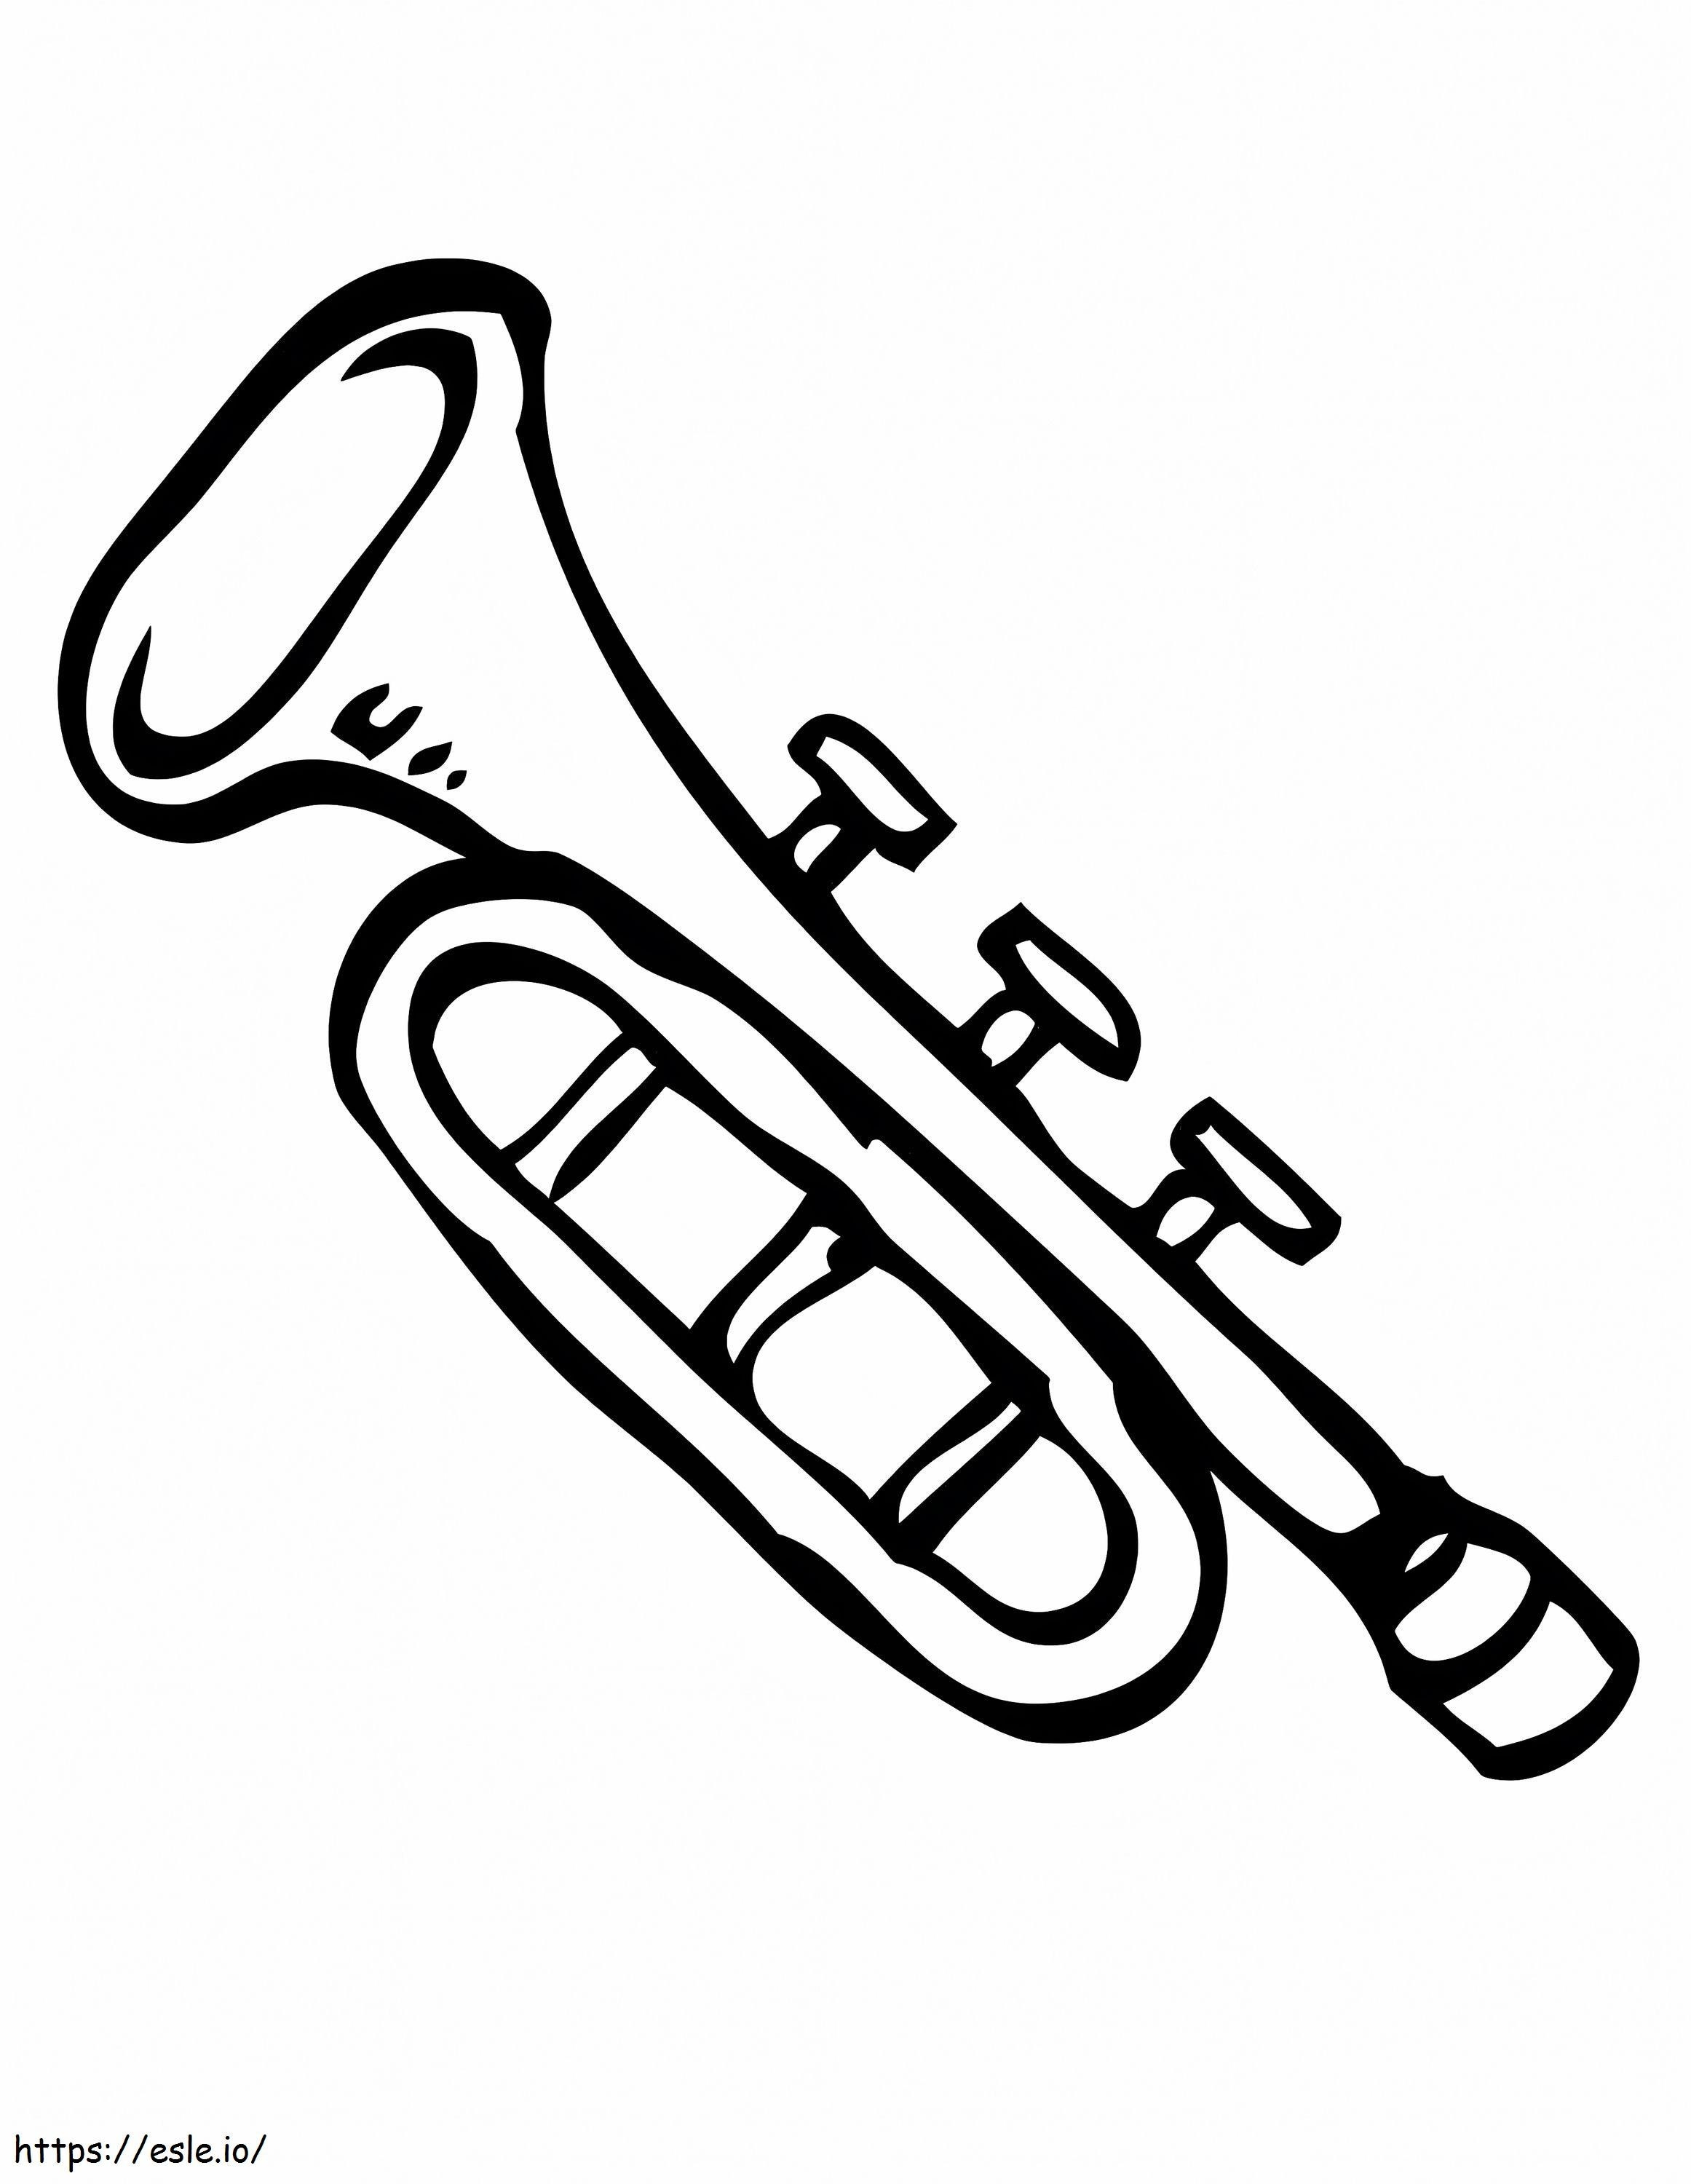 Simple Trumpet 1 coloring page